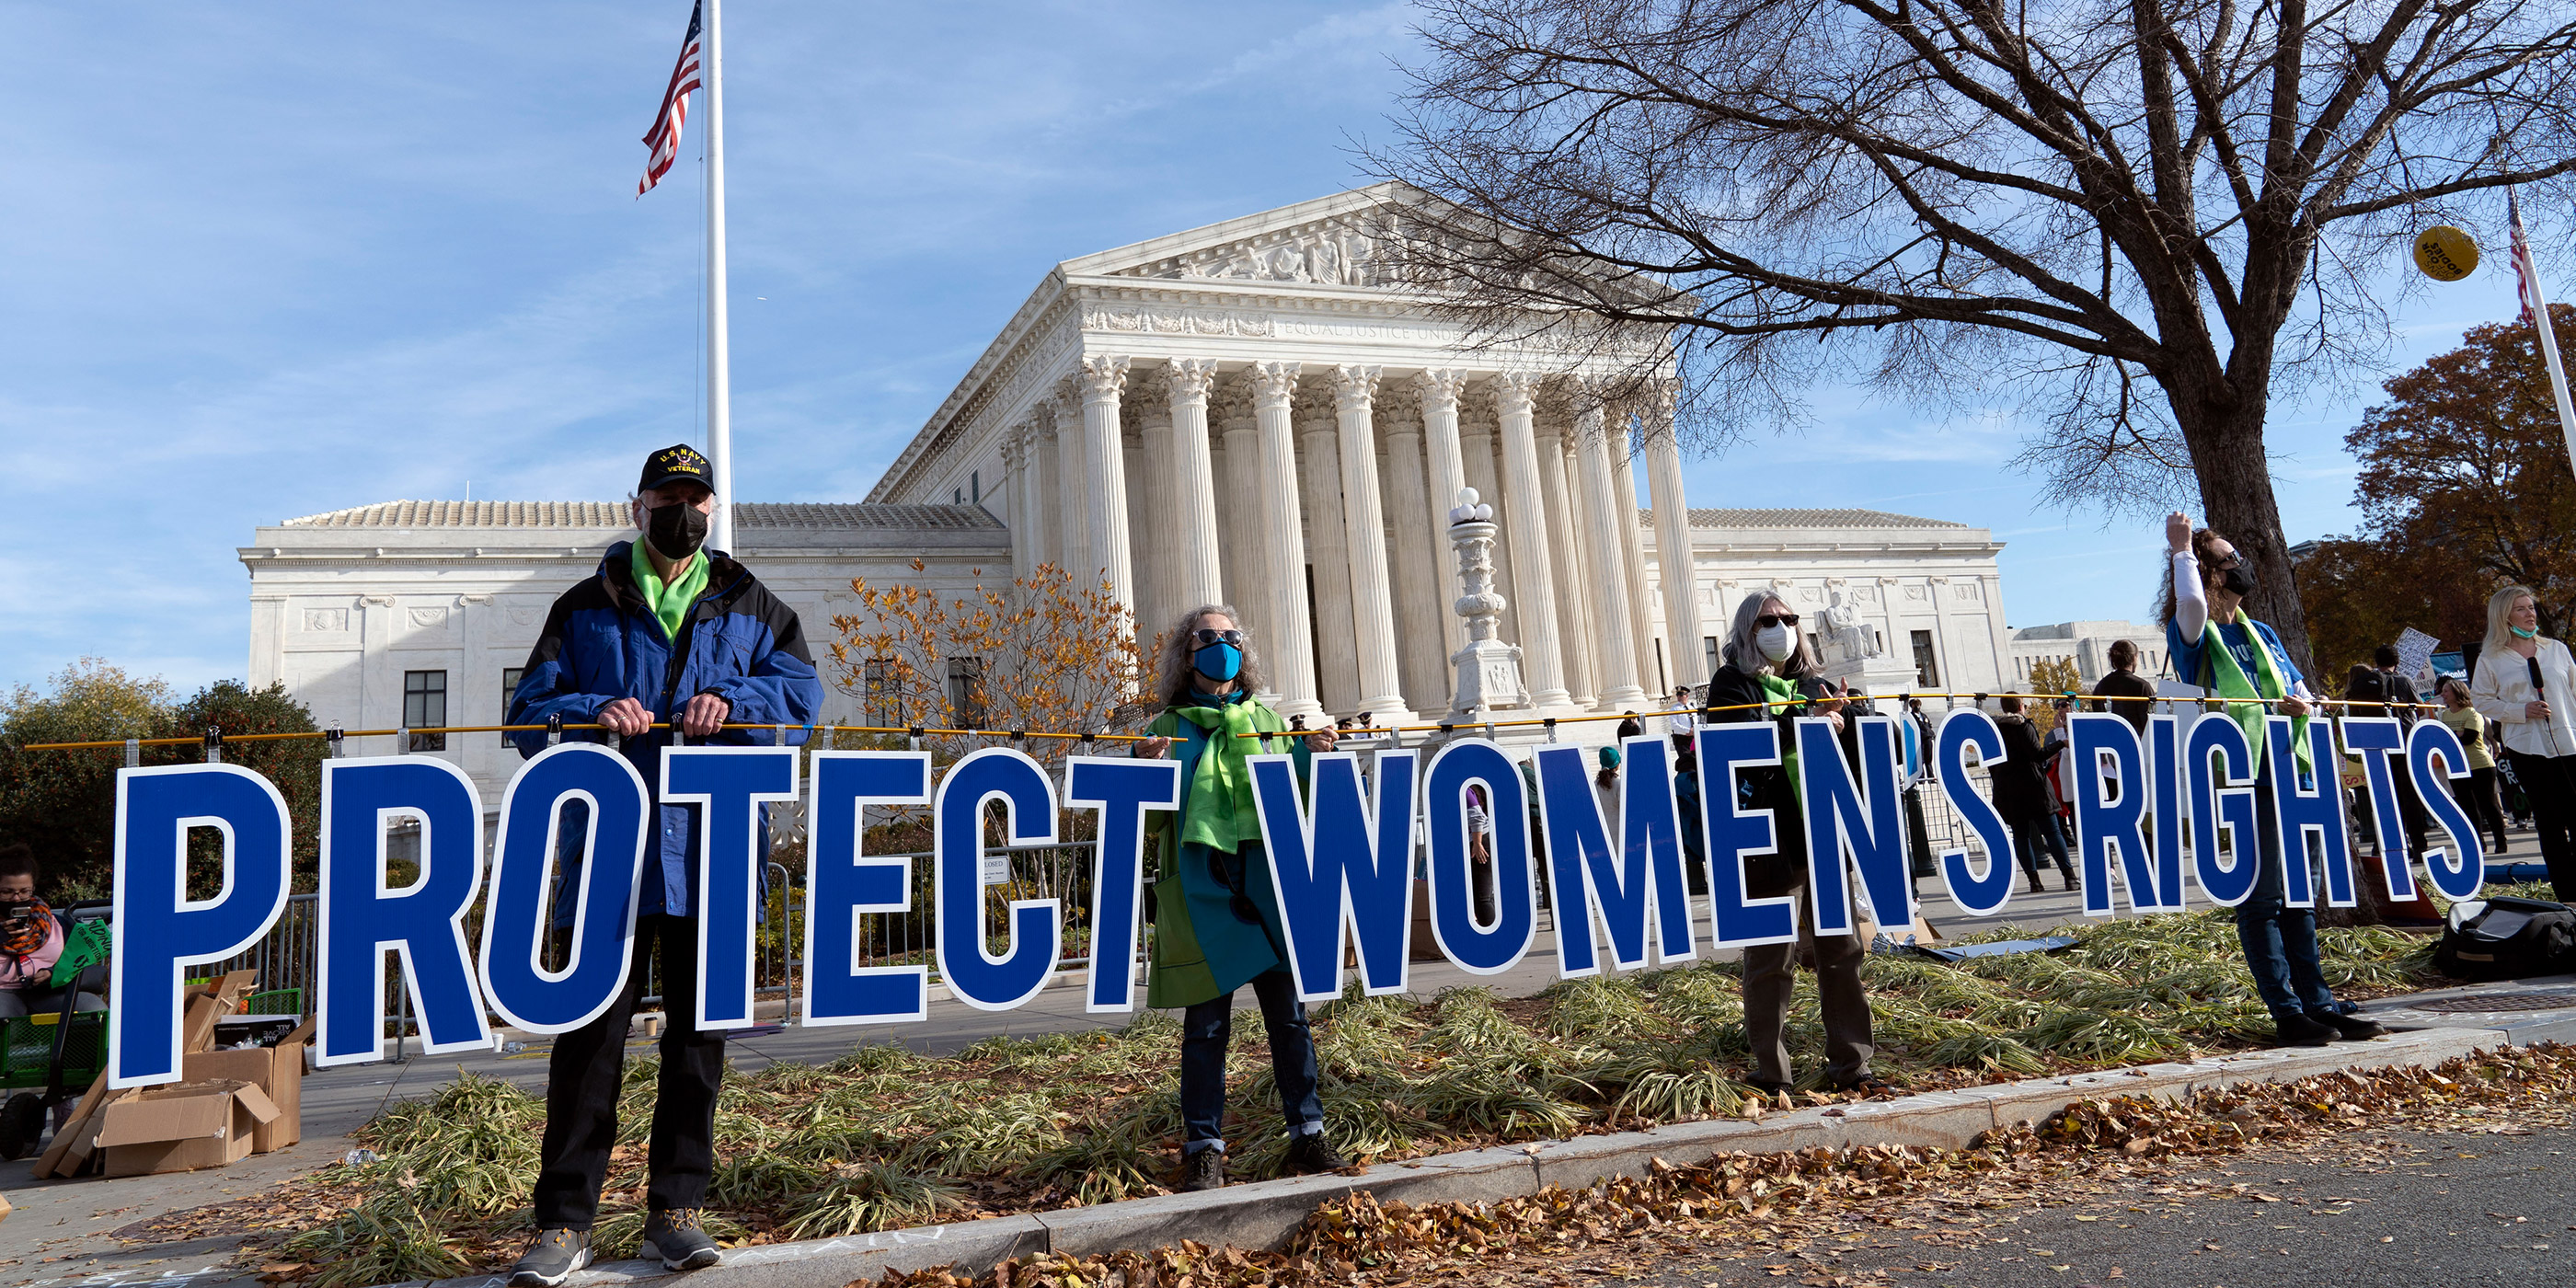 Advocates demonstrate in front of the U.S. Supreme Court holding signs that say “Protect Women’s Rights.”